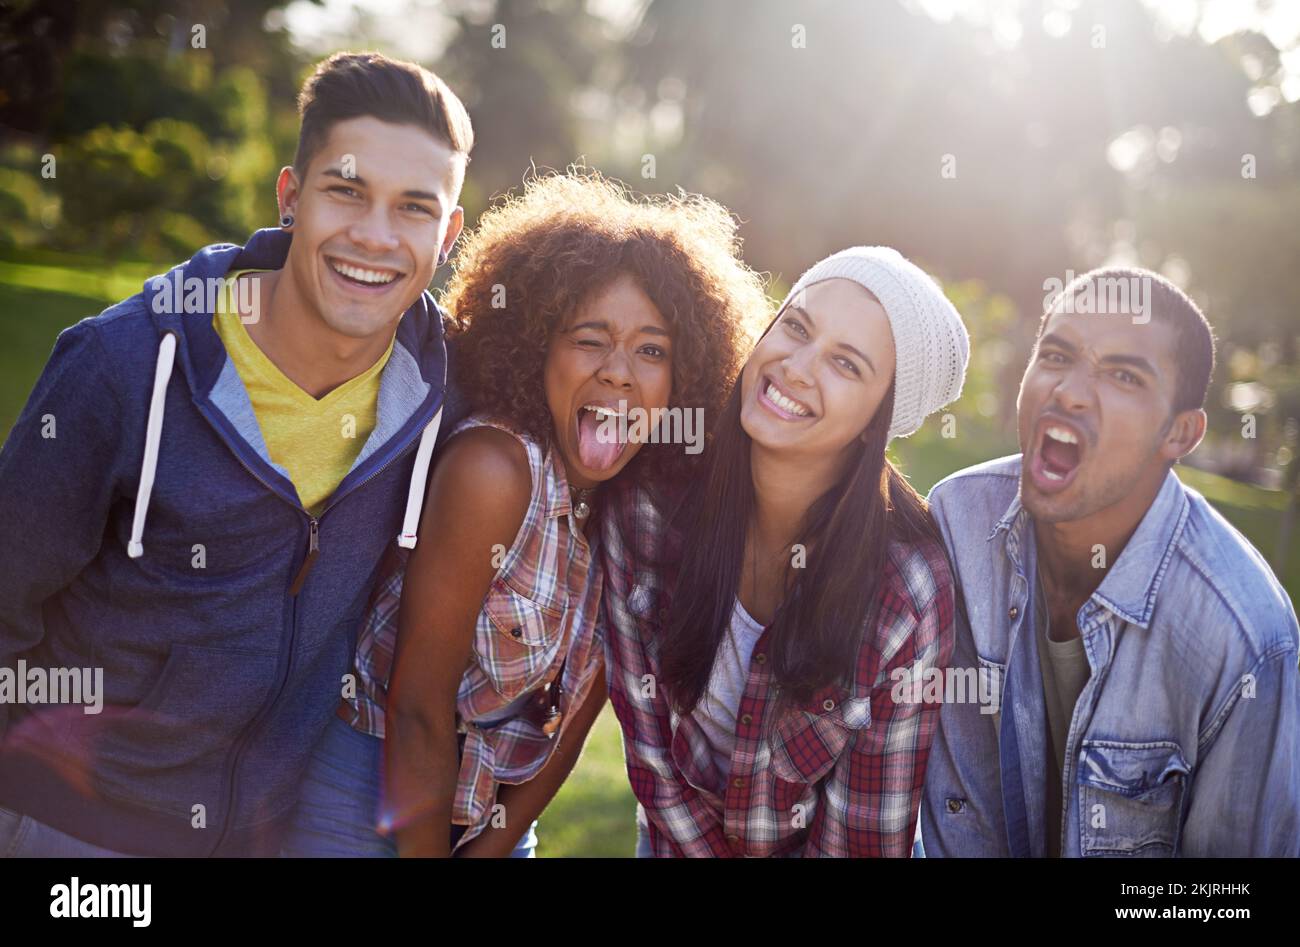 Friends- the crazy family we choose for ourselves. Portrait of a group of young friends hanging out at the park. Stock Photo